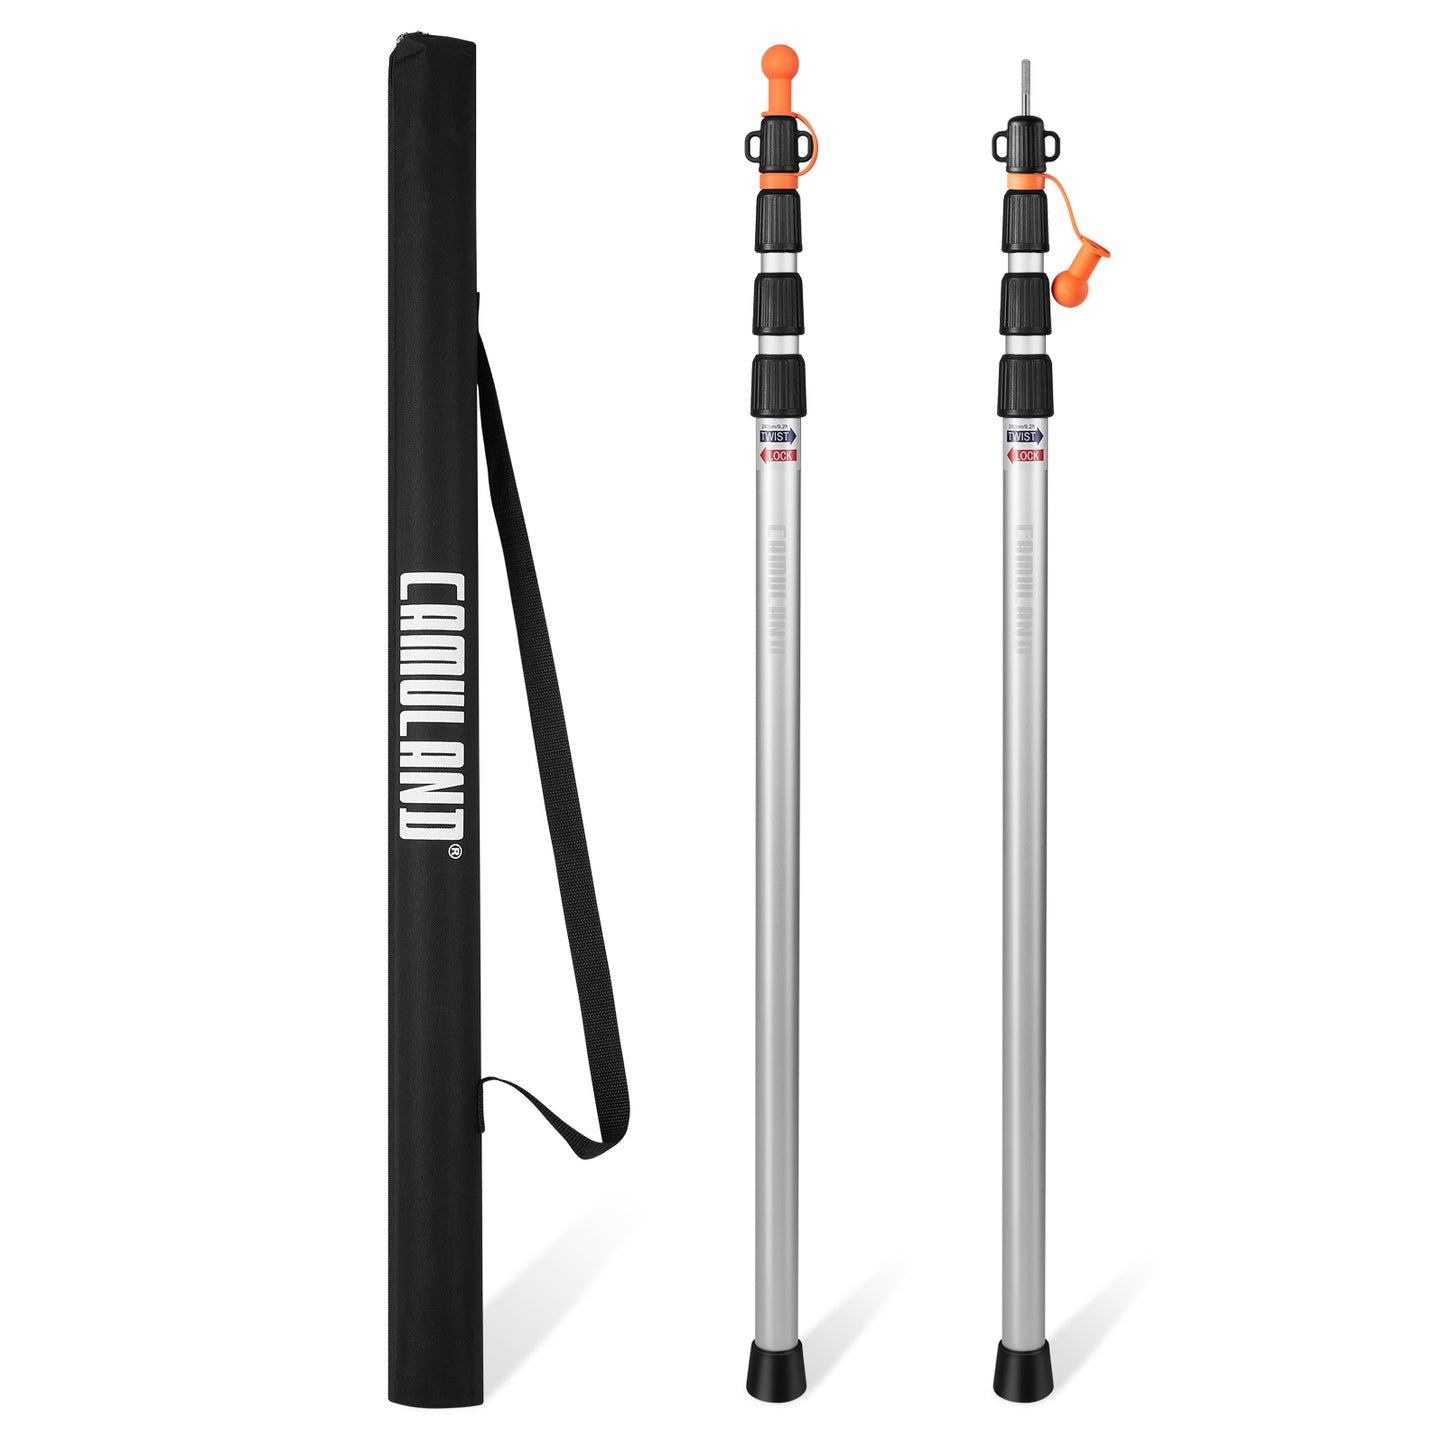 CAMULAND Heavy Duty Trap Poles Set, Adjustable, Lightweight and Portable(Silver)